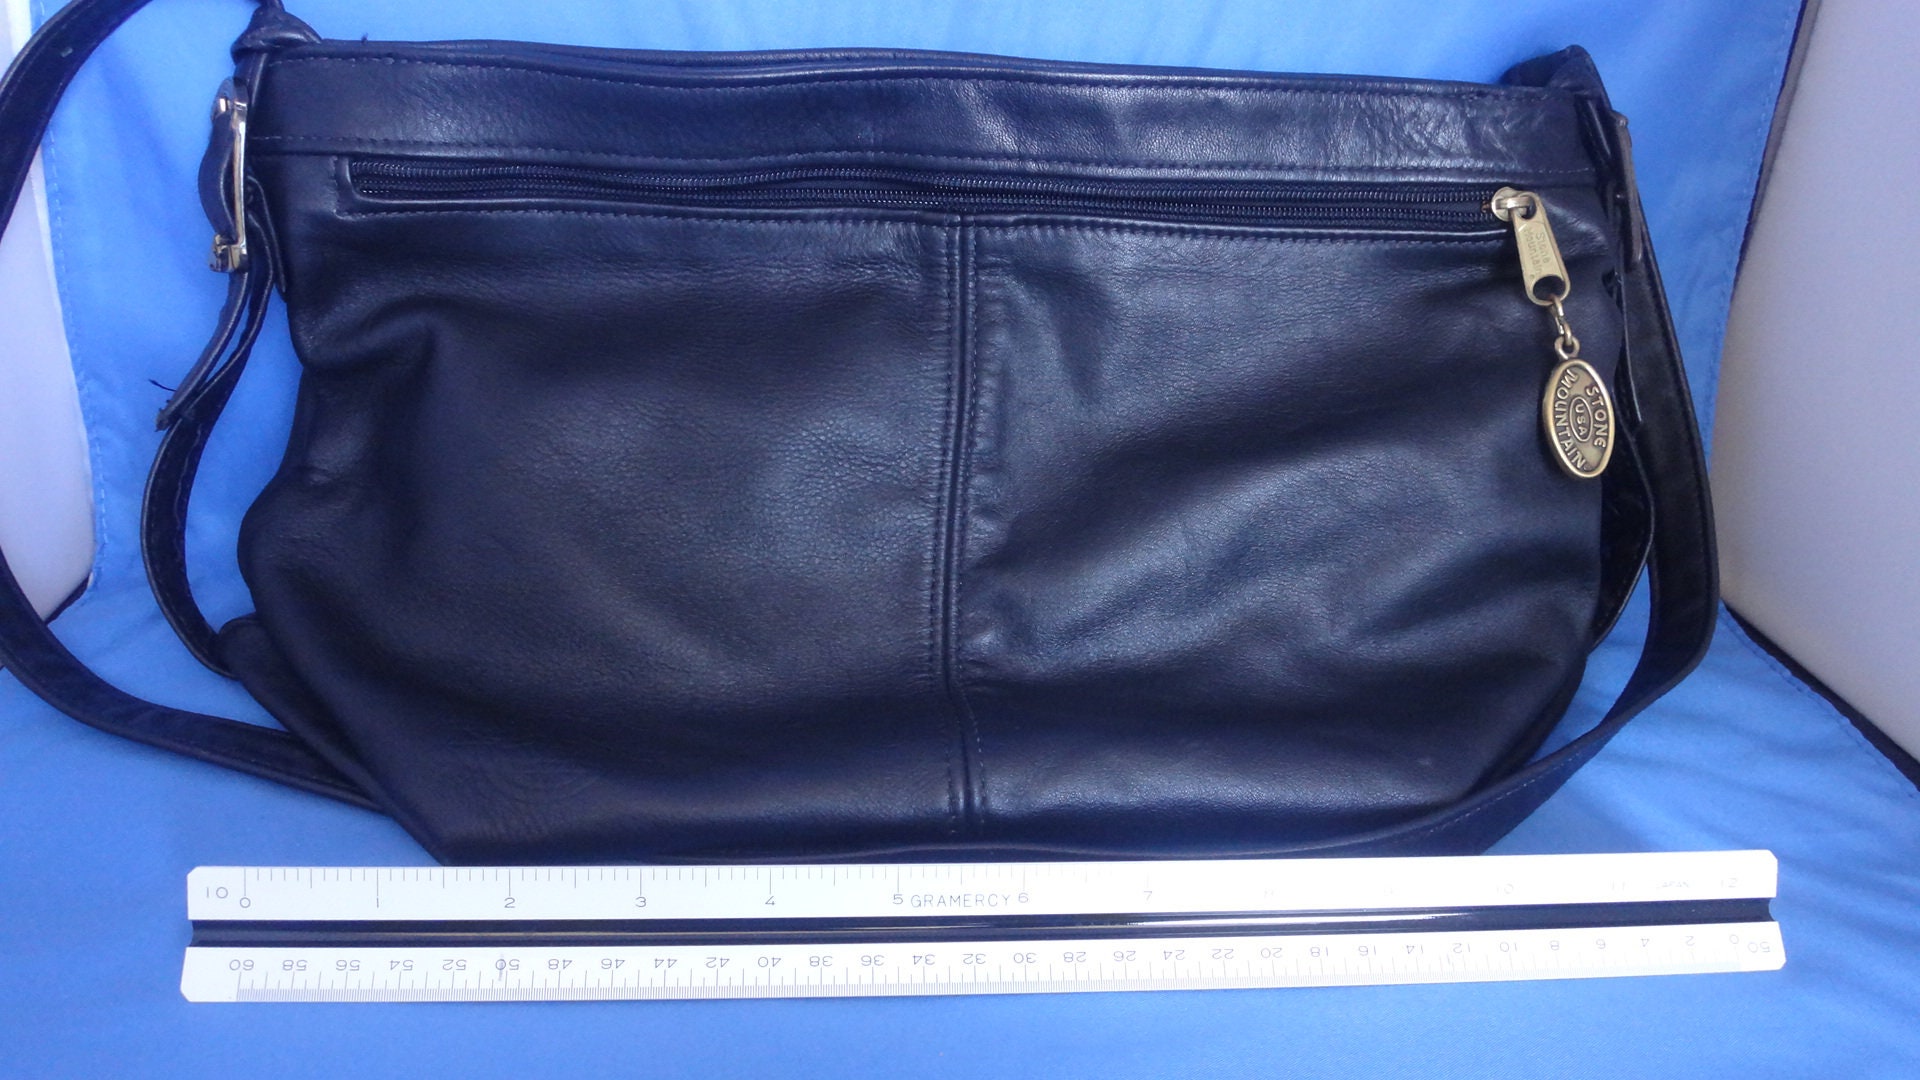 Stone Mountain Black Leather Handbag Shoulder Bag Purse - $28 - From The